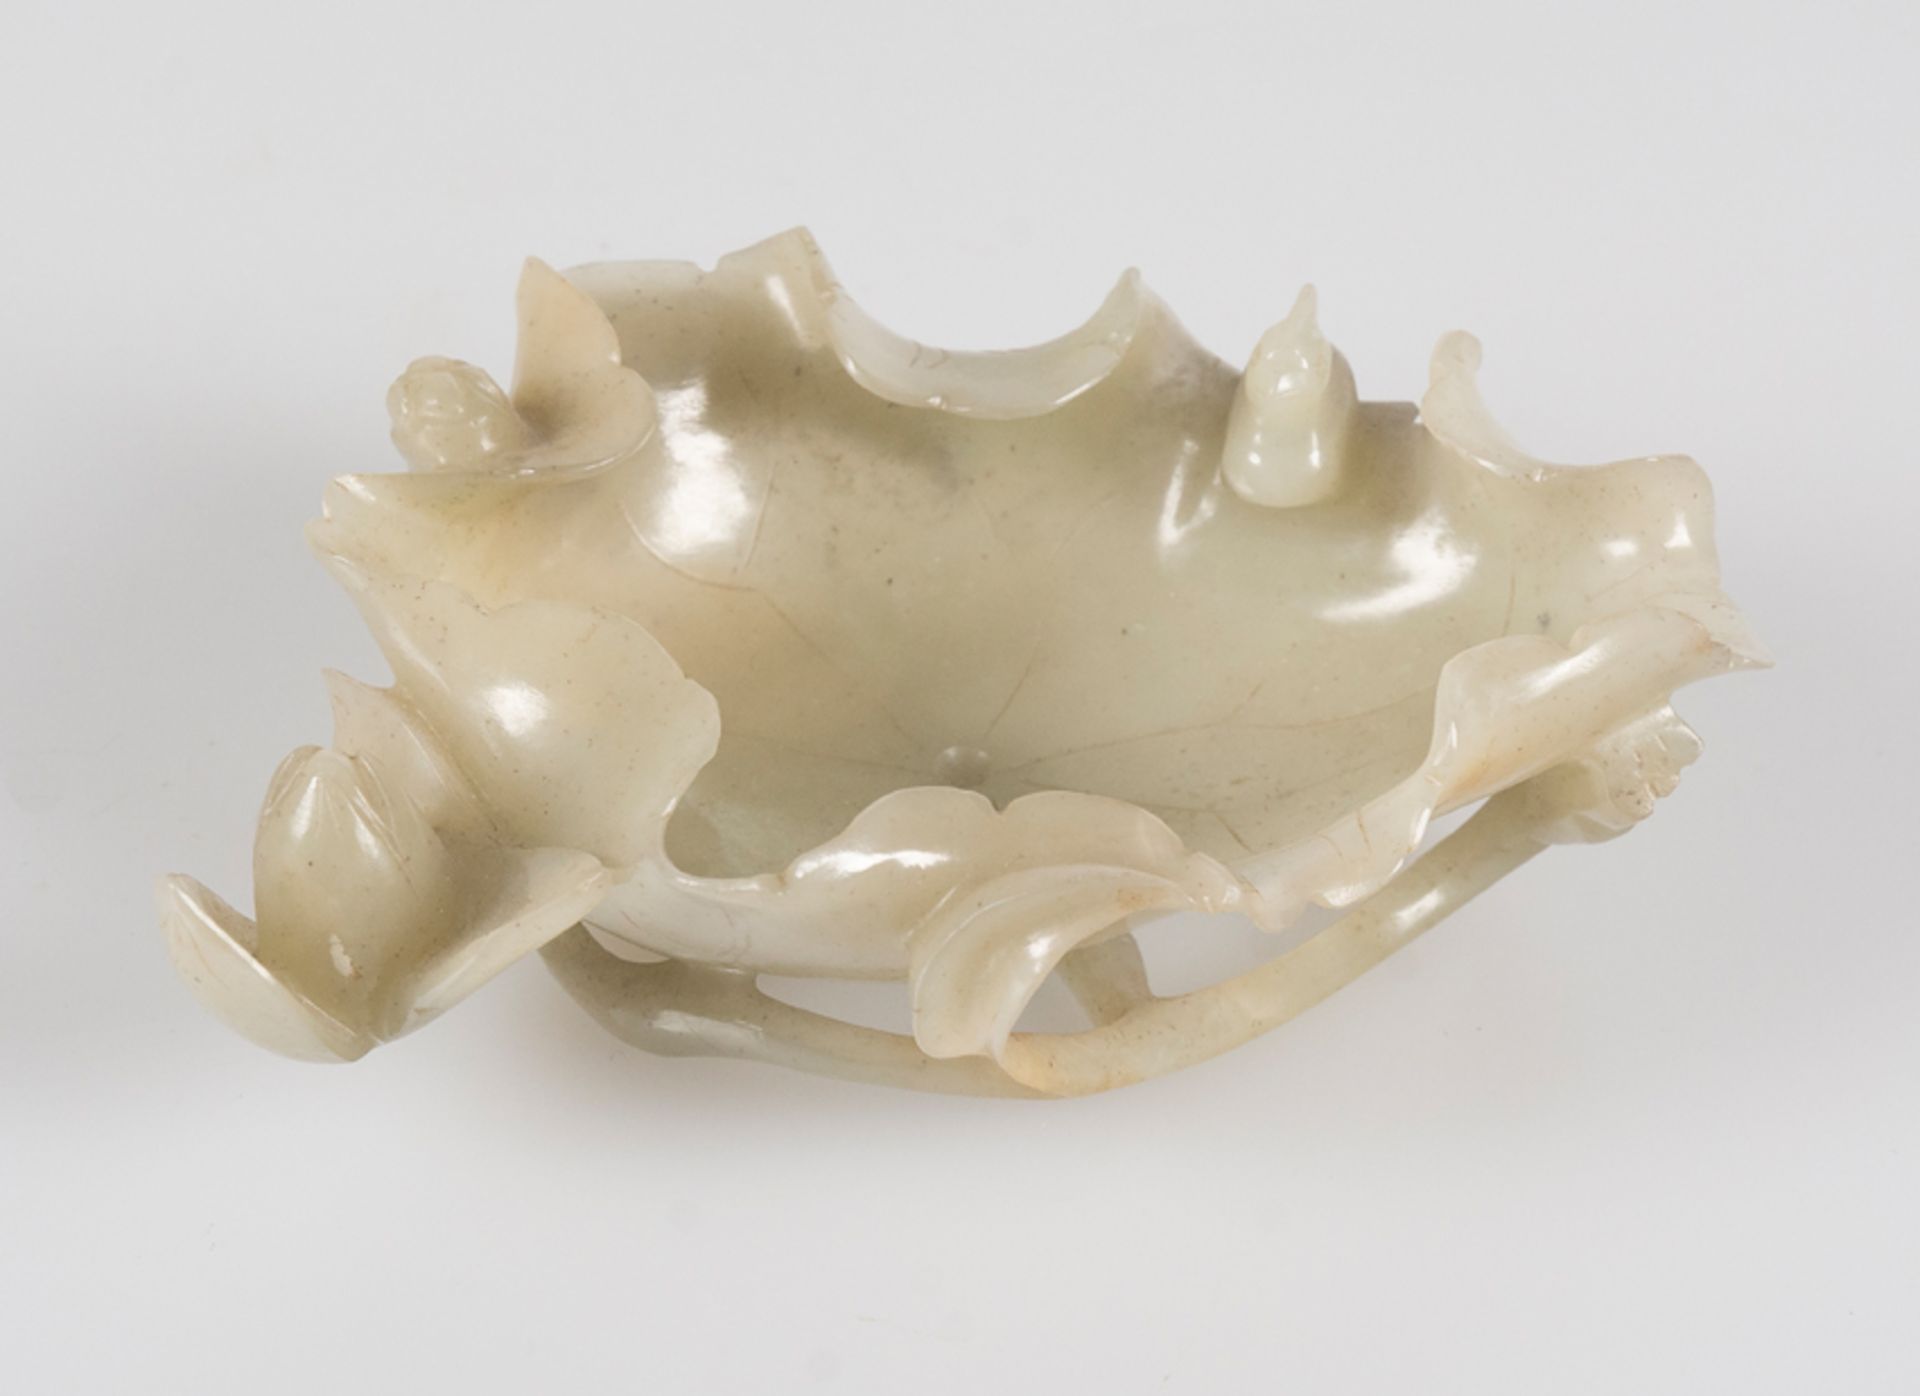 Jade goblet in the shape of a flower. China. 19th century.